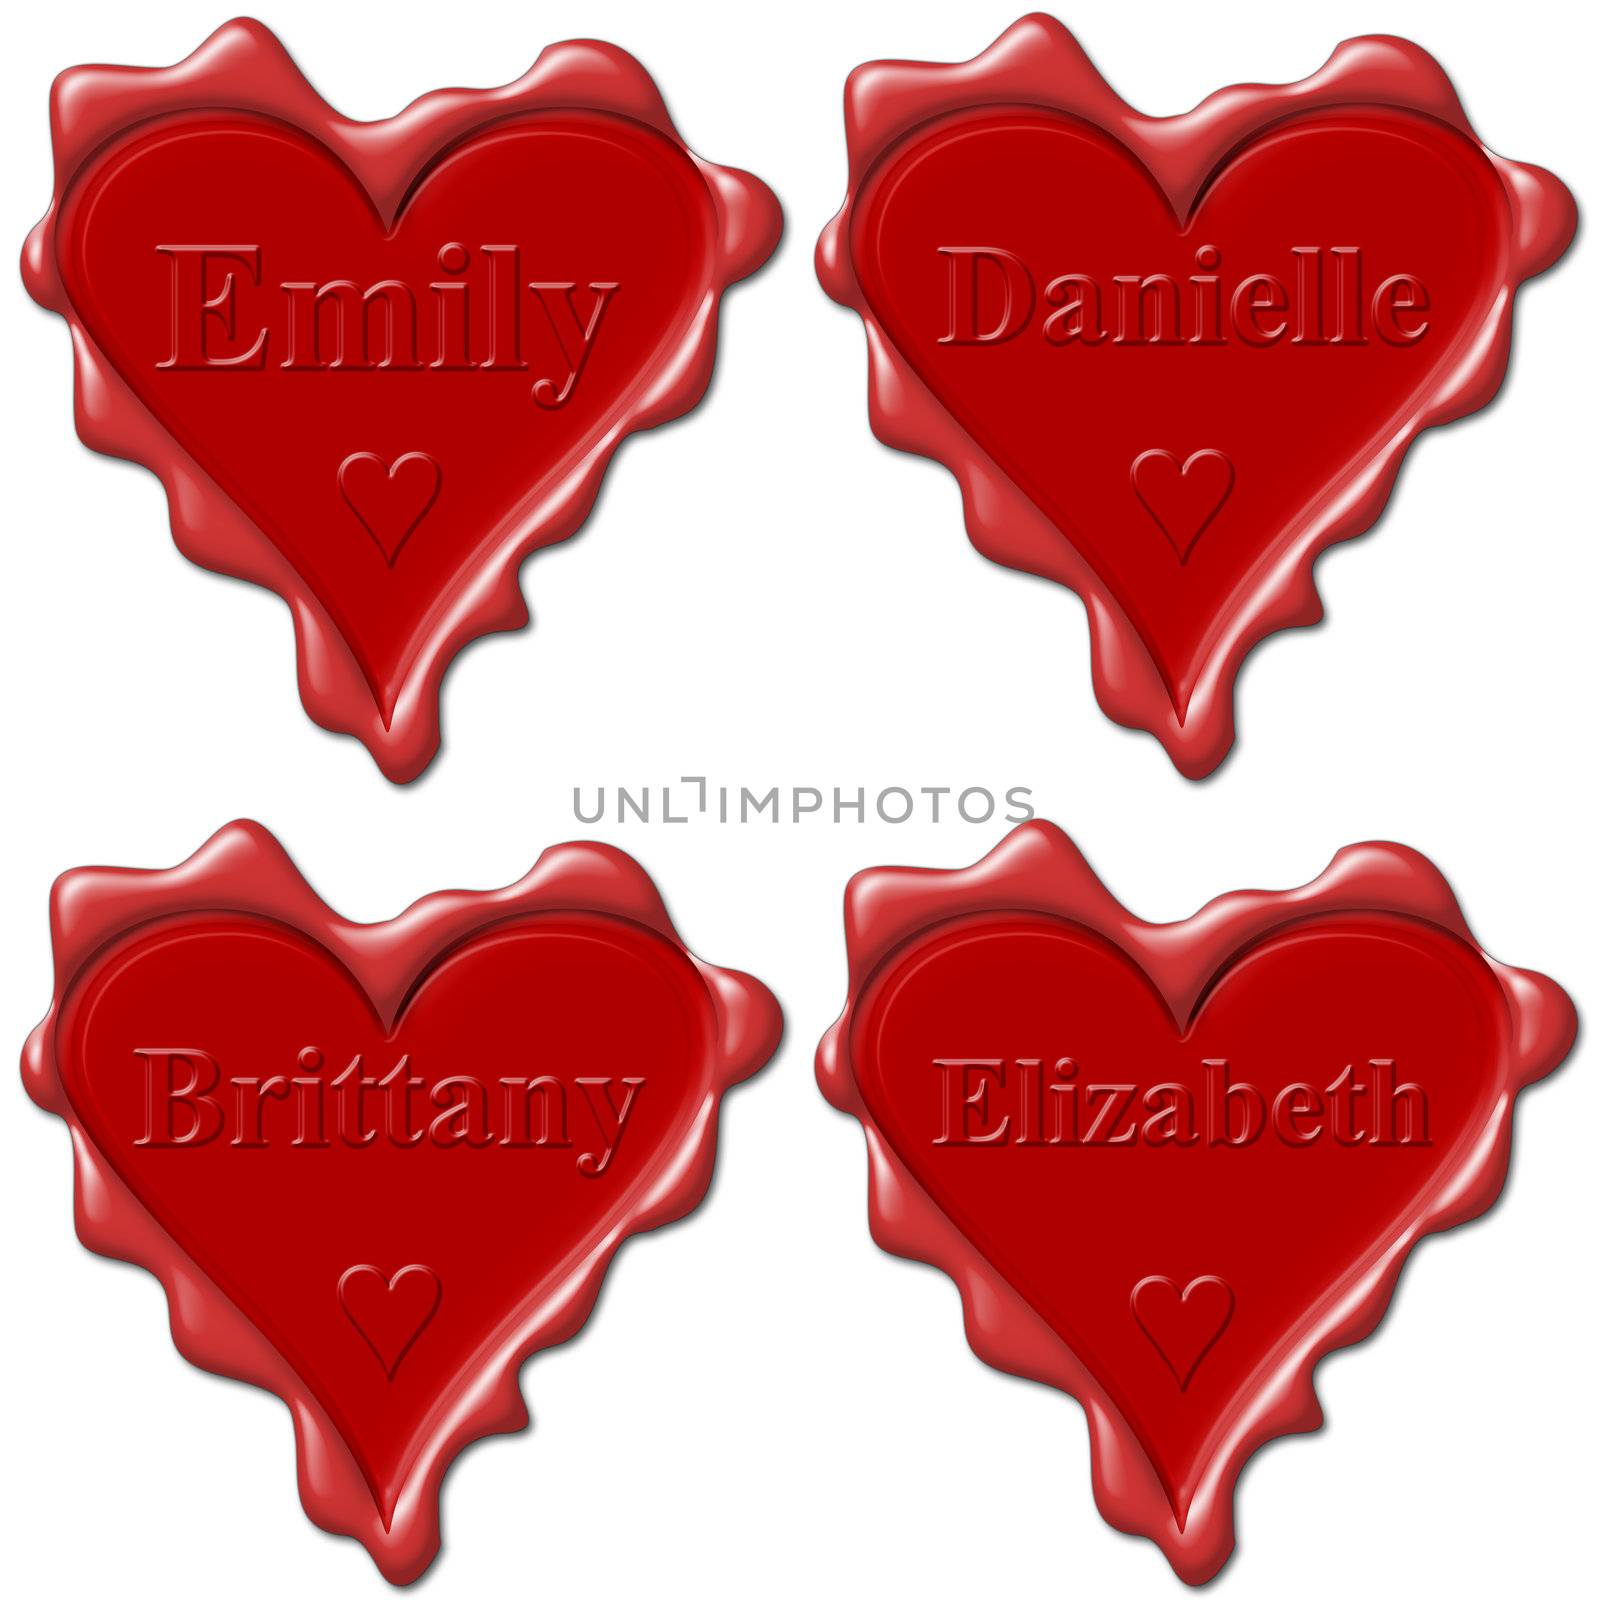 Valentine love hearts with names: Emily, Danielle, Brittany, Eli by mozzyb